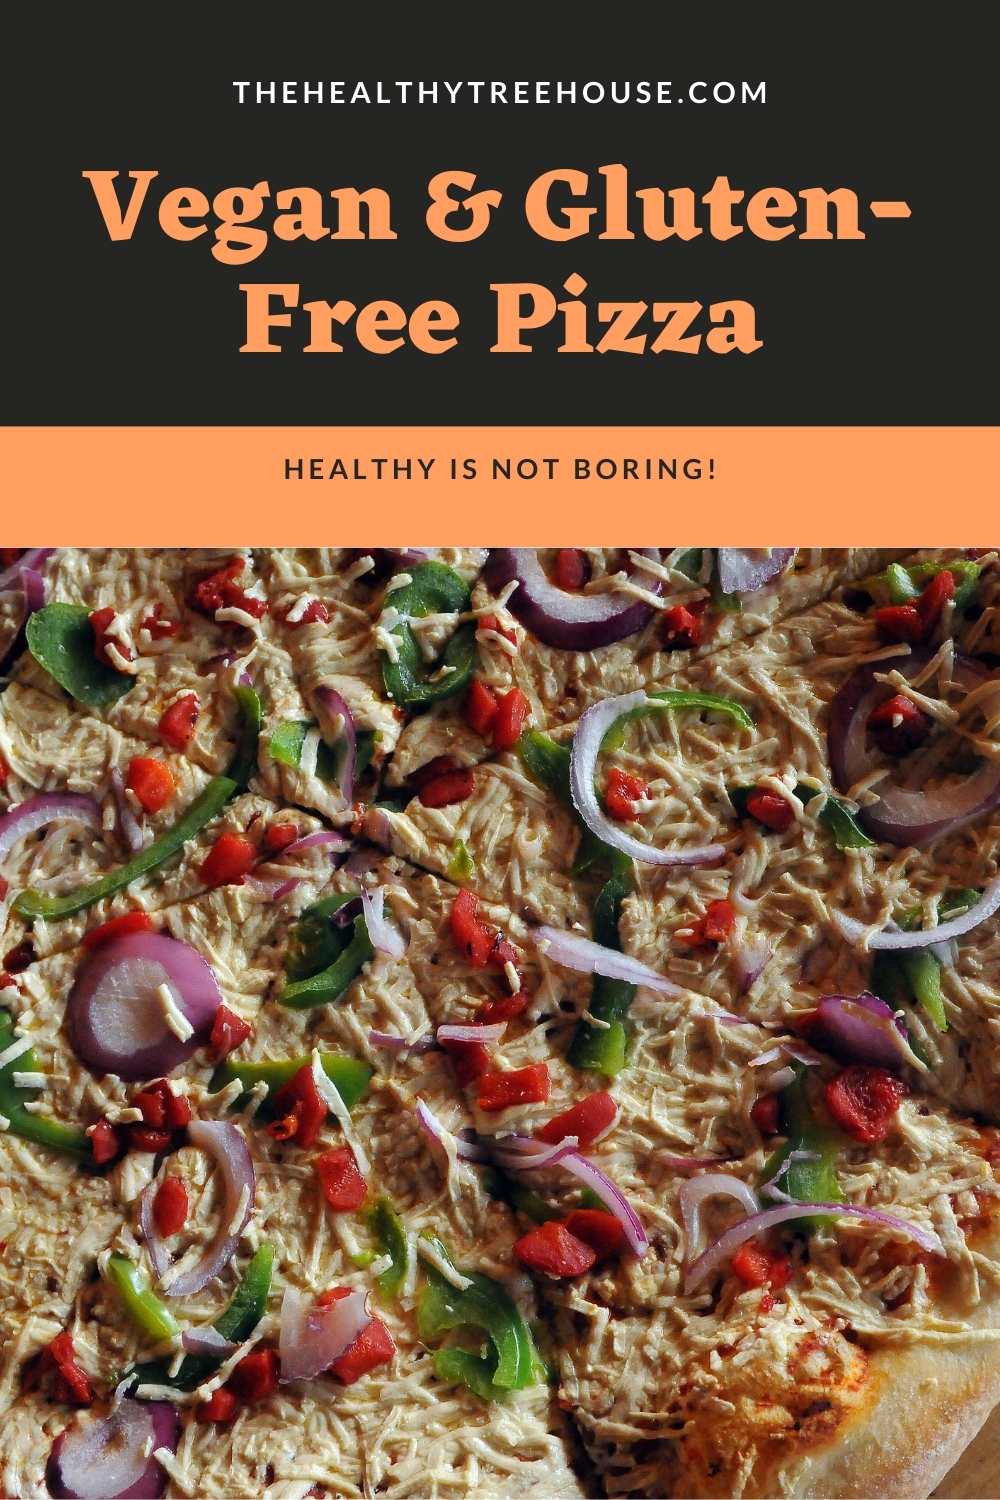 Vegan Gluten Free Pizza Crust And Toppings Recipe The Healthy Treehouse